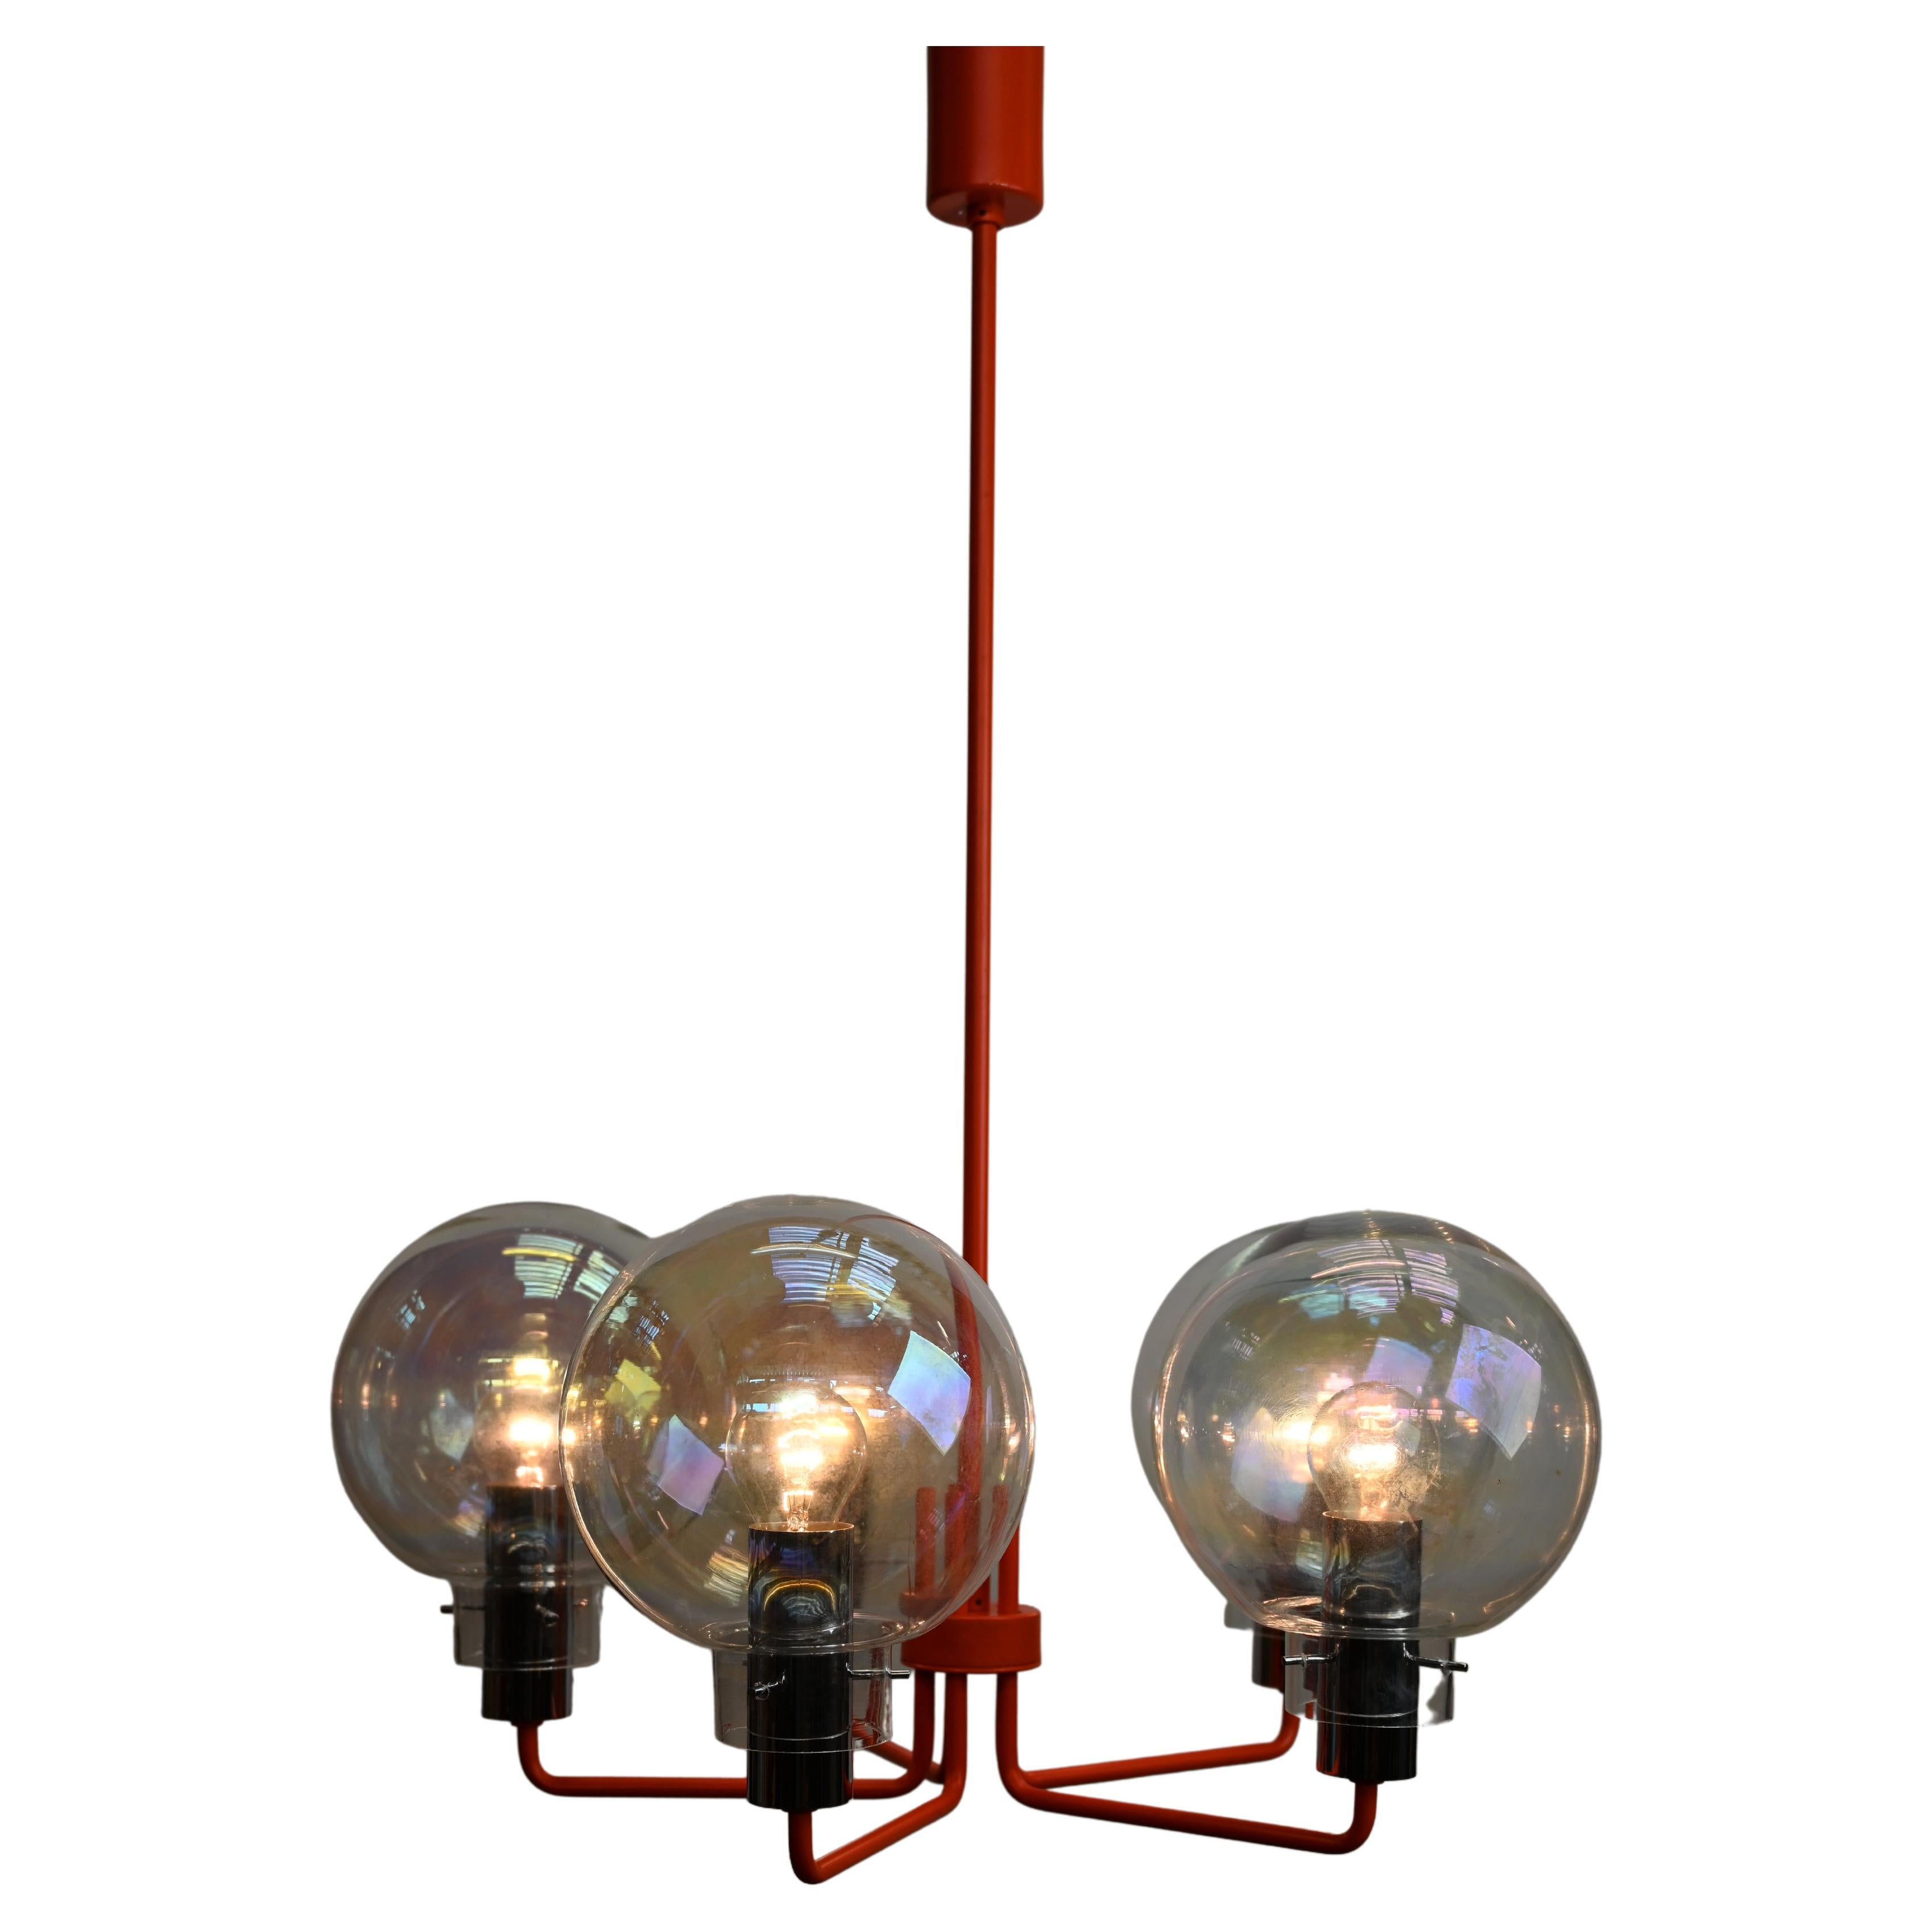 Grand Chandelier by BAG Turgi with 5 Large Spheres, Switzerland